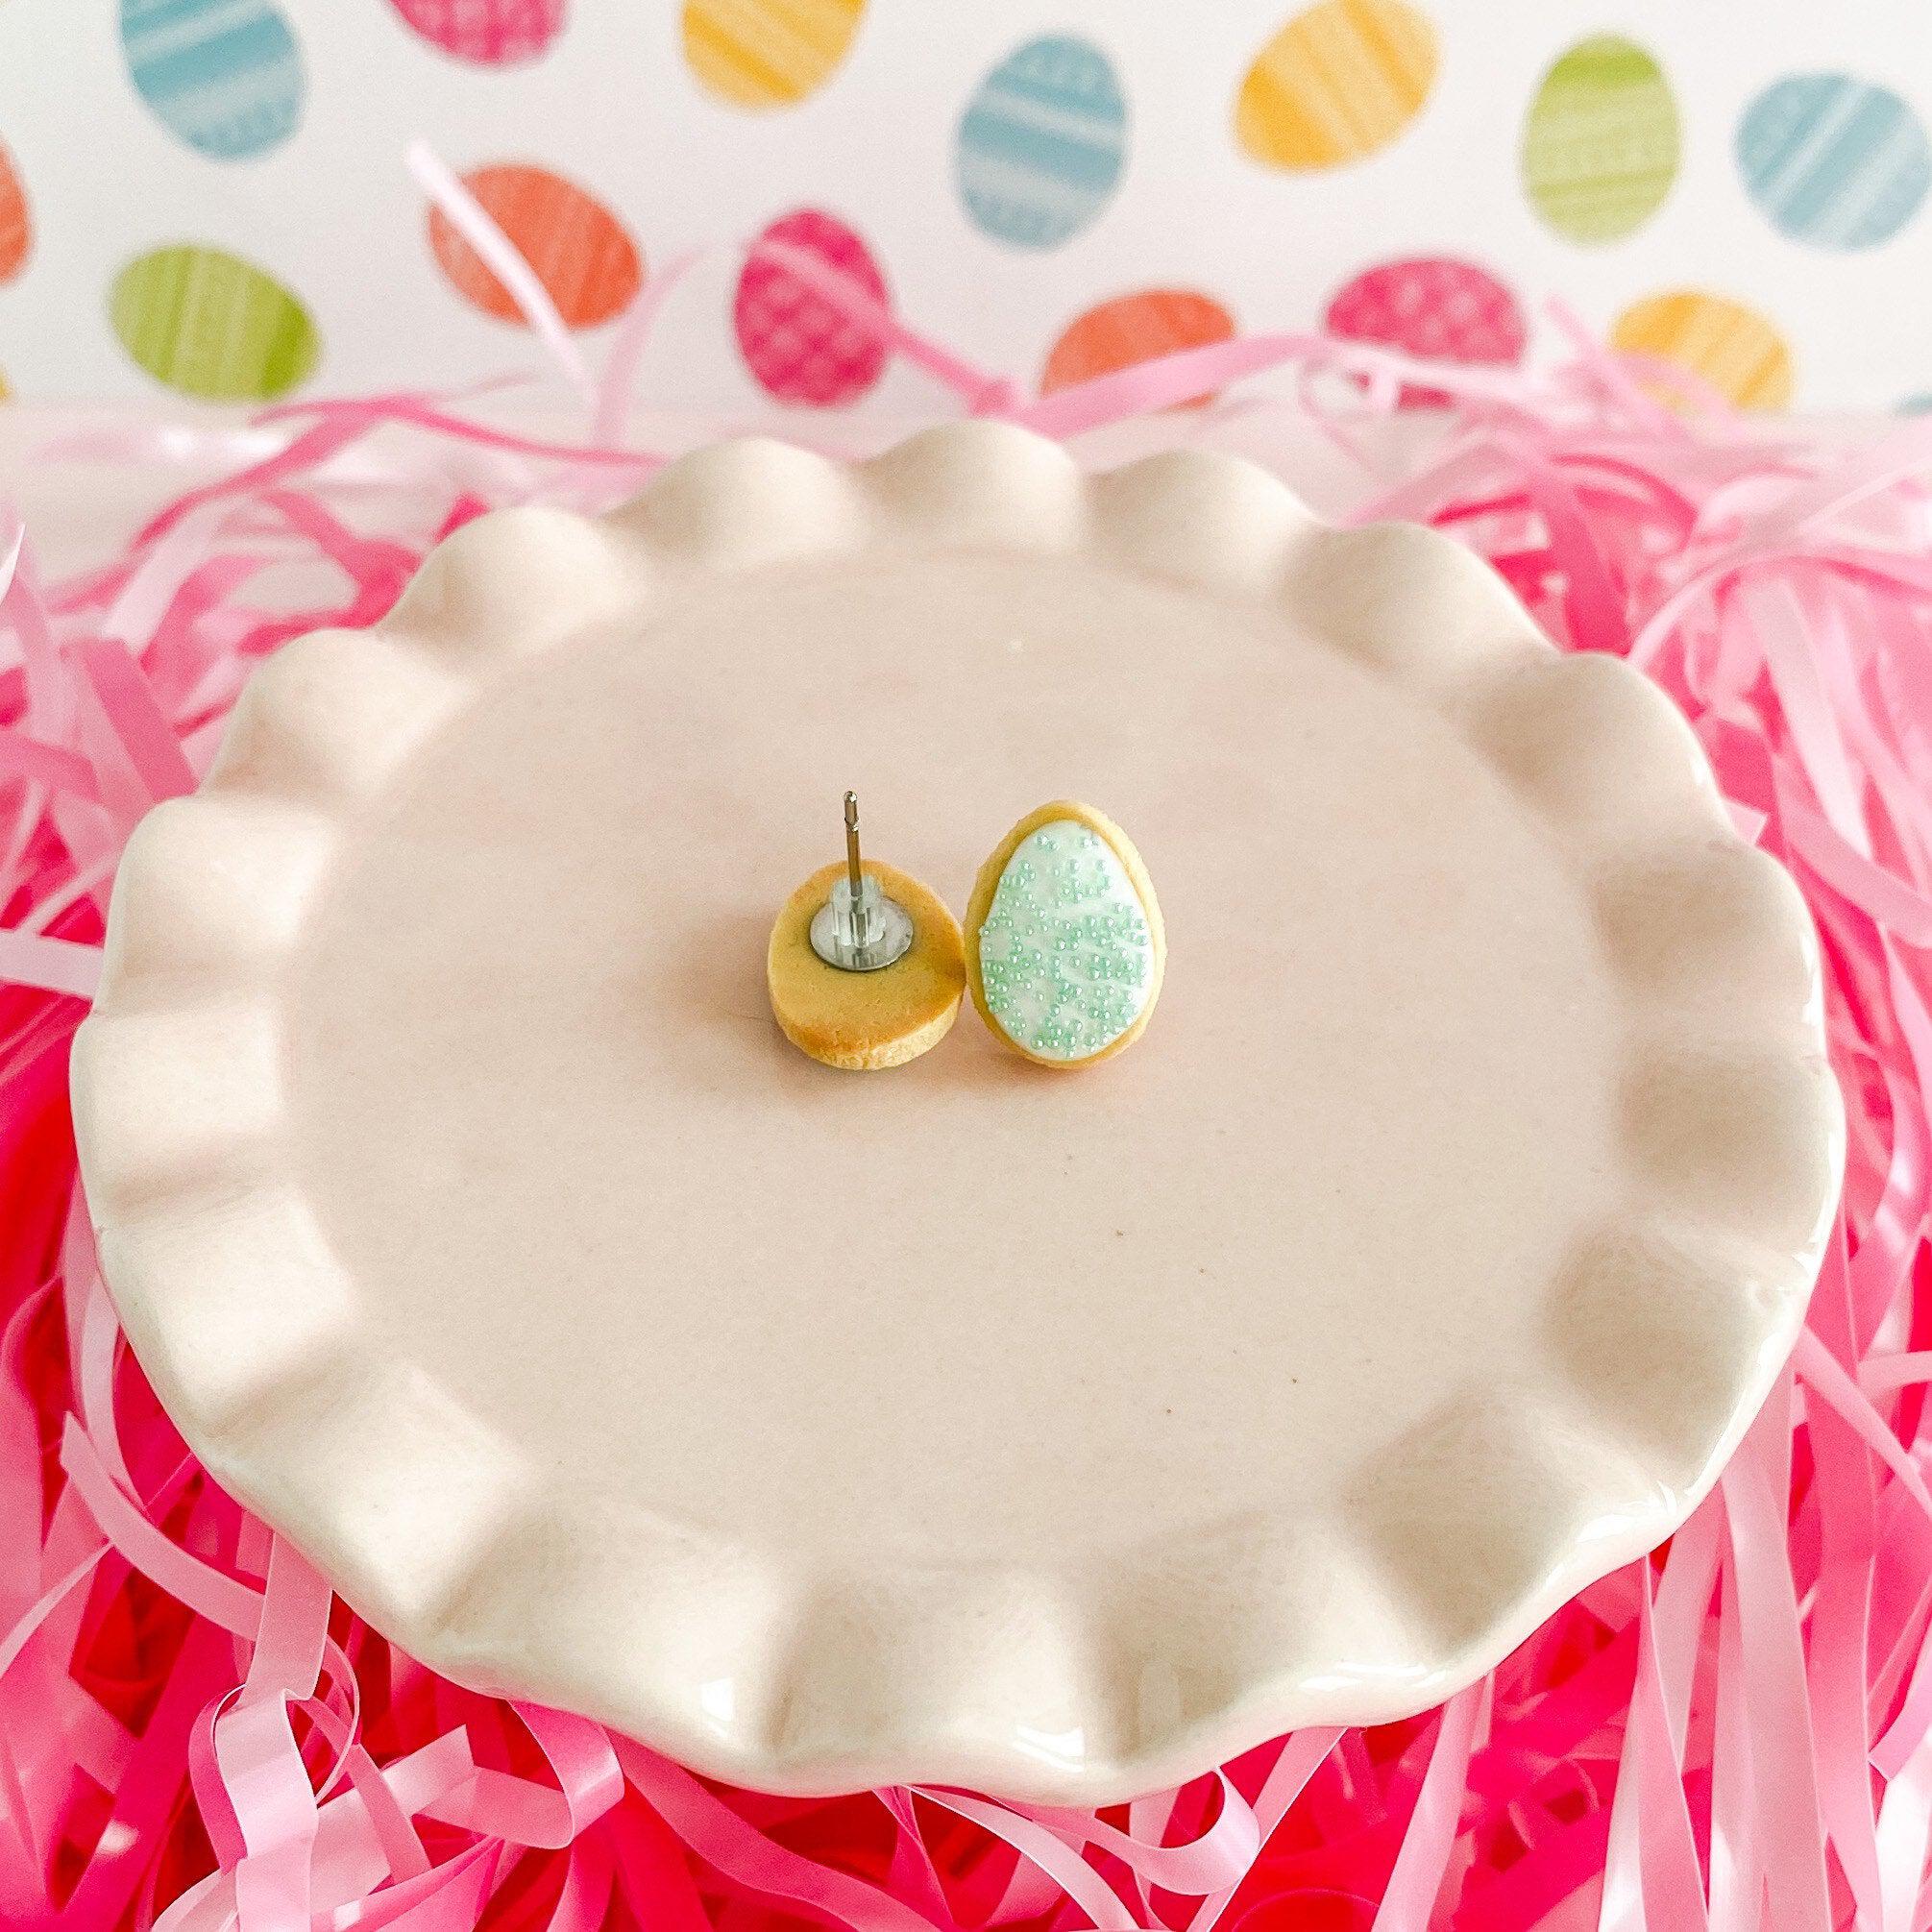 fireflyFrippery Mint Green Easter Egg Sugar Cookie Earrings on Pink Display - Front & Back